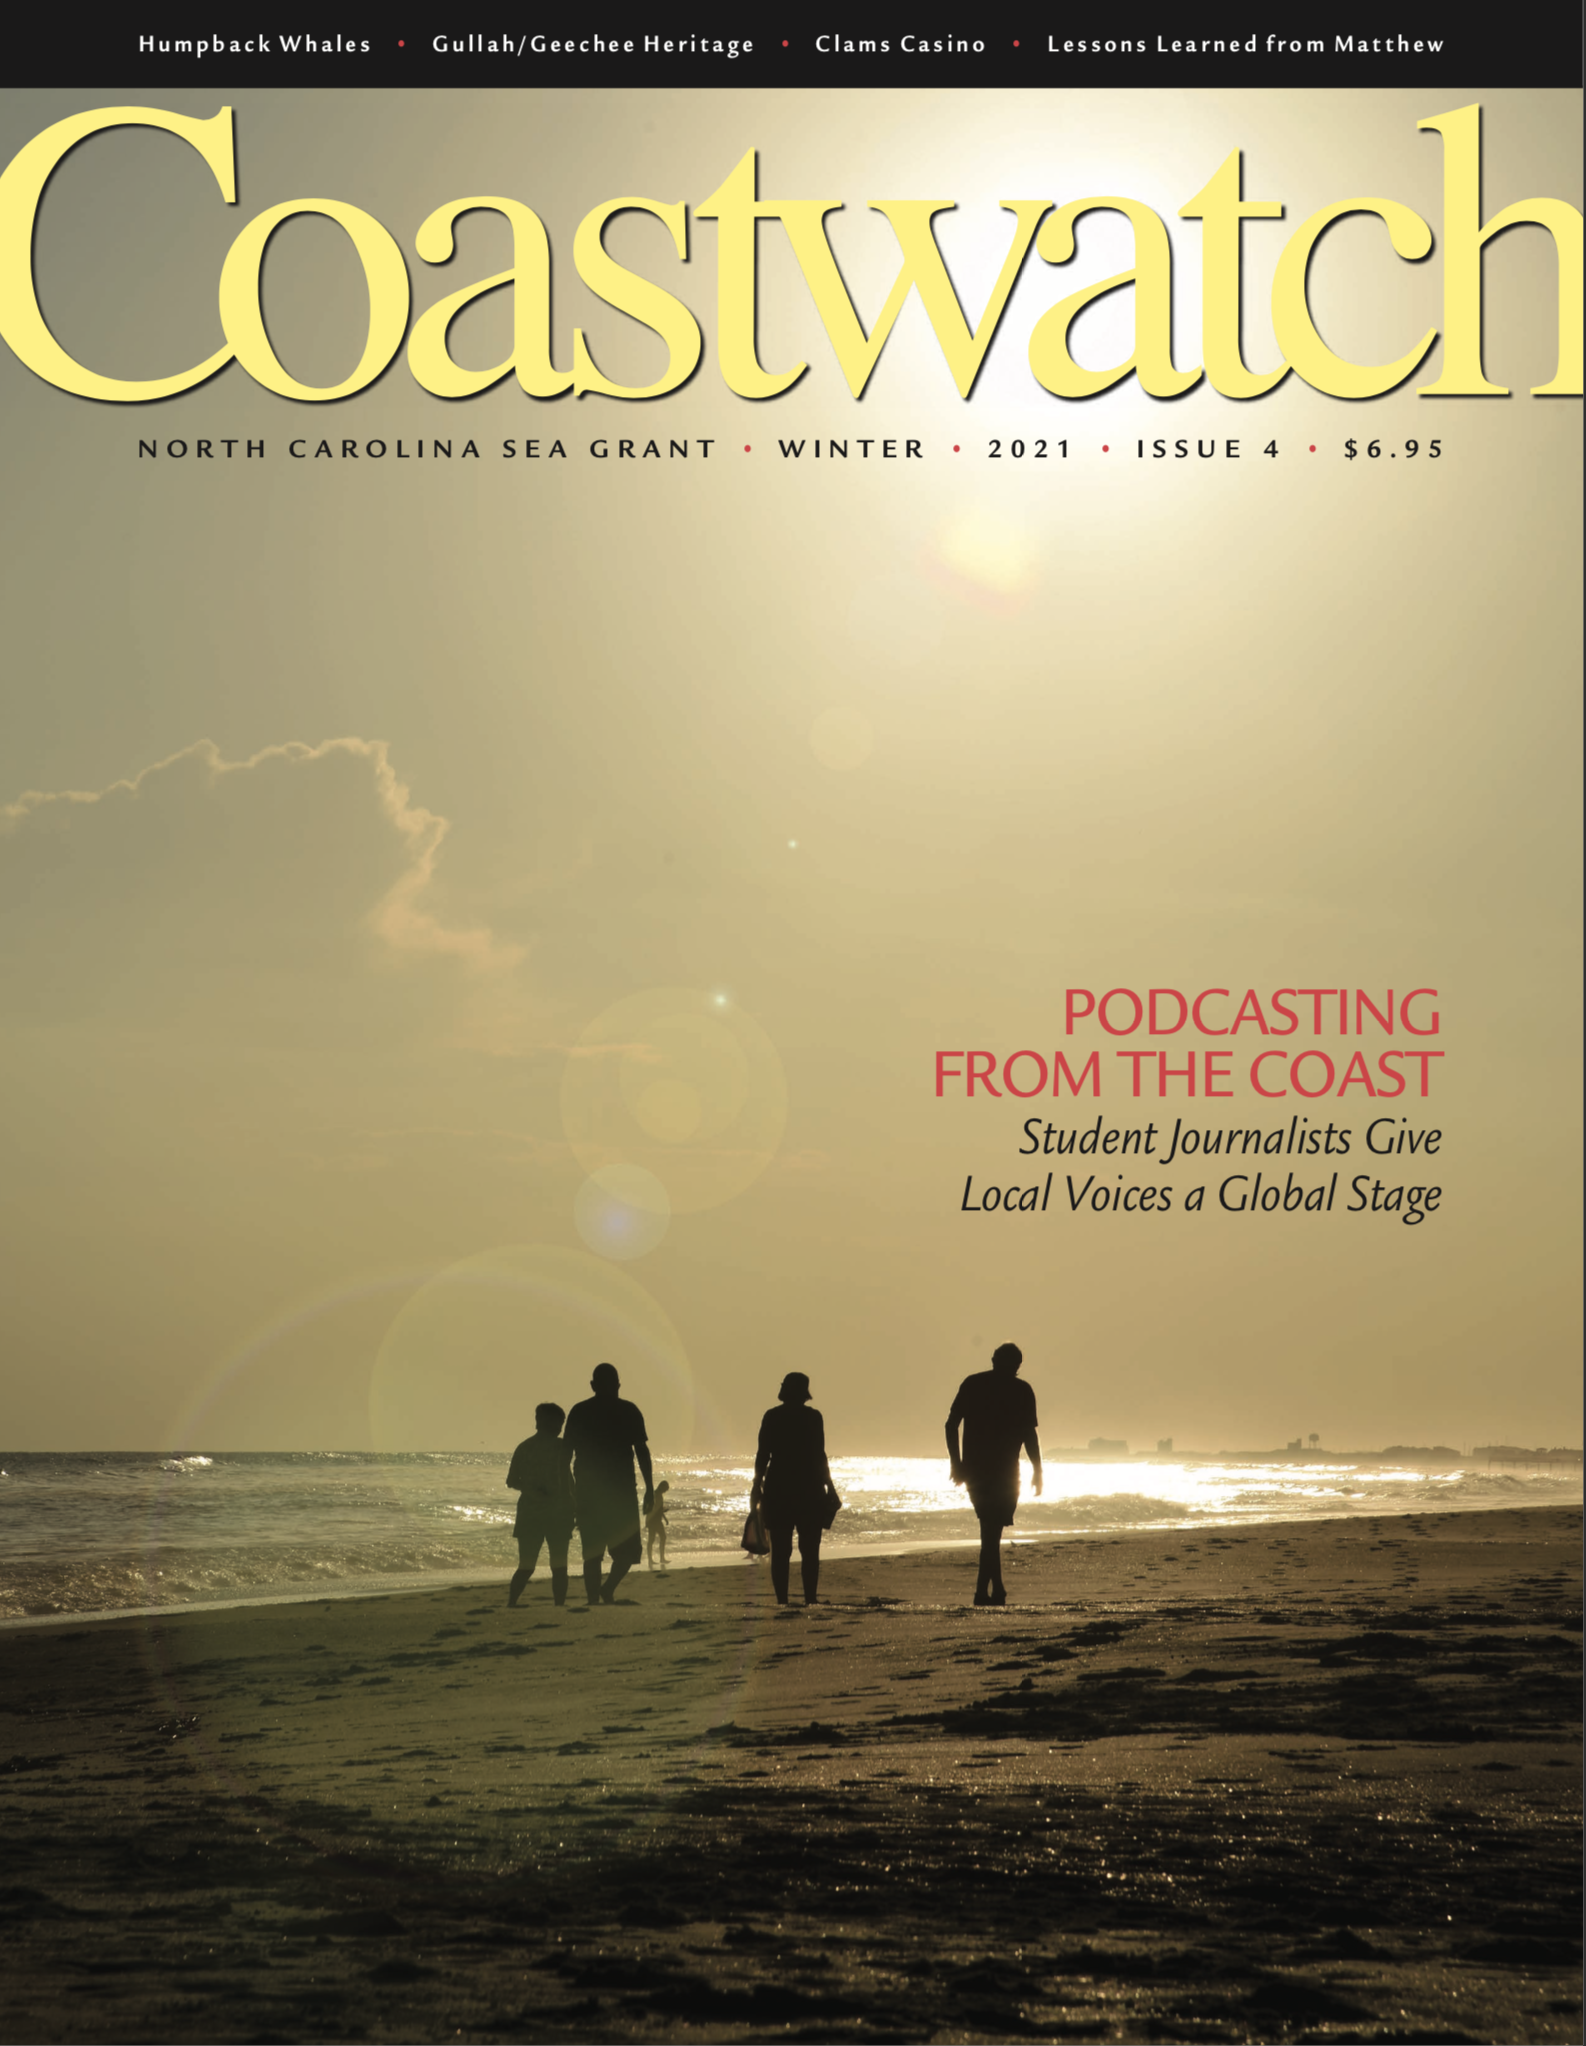 magazine cover image of beachgoers: The Winter issue is the last in 2021 for North Carolina Sea Grant's flagship publication, which earned seven state and national honors during the year.